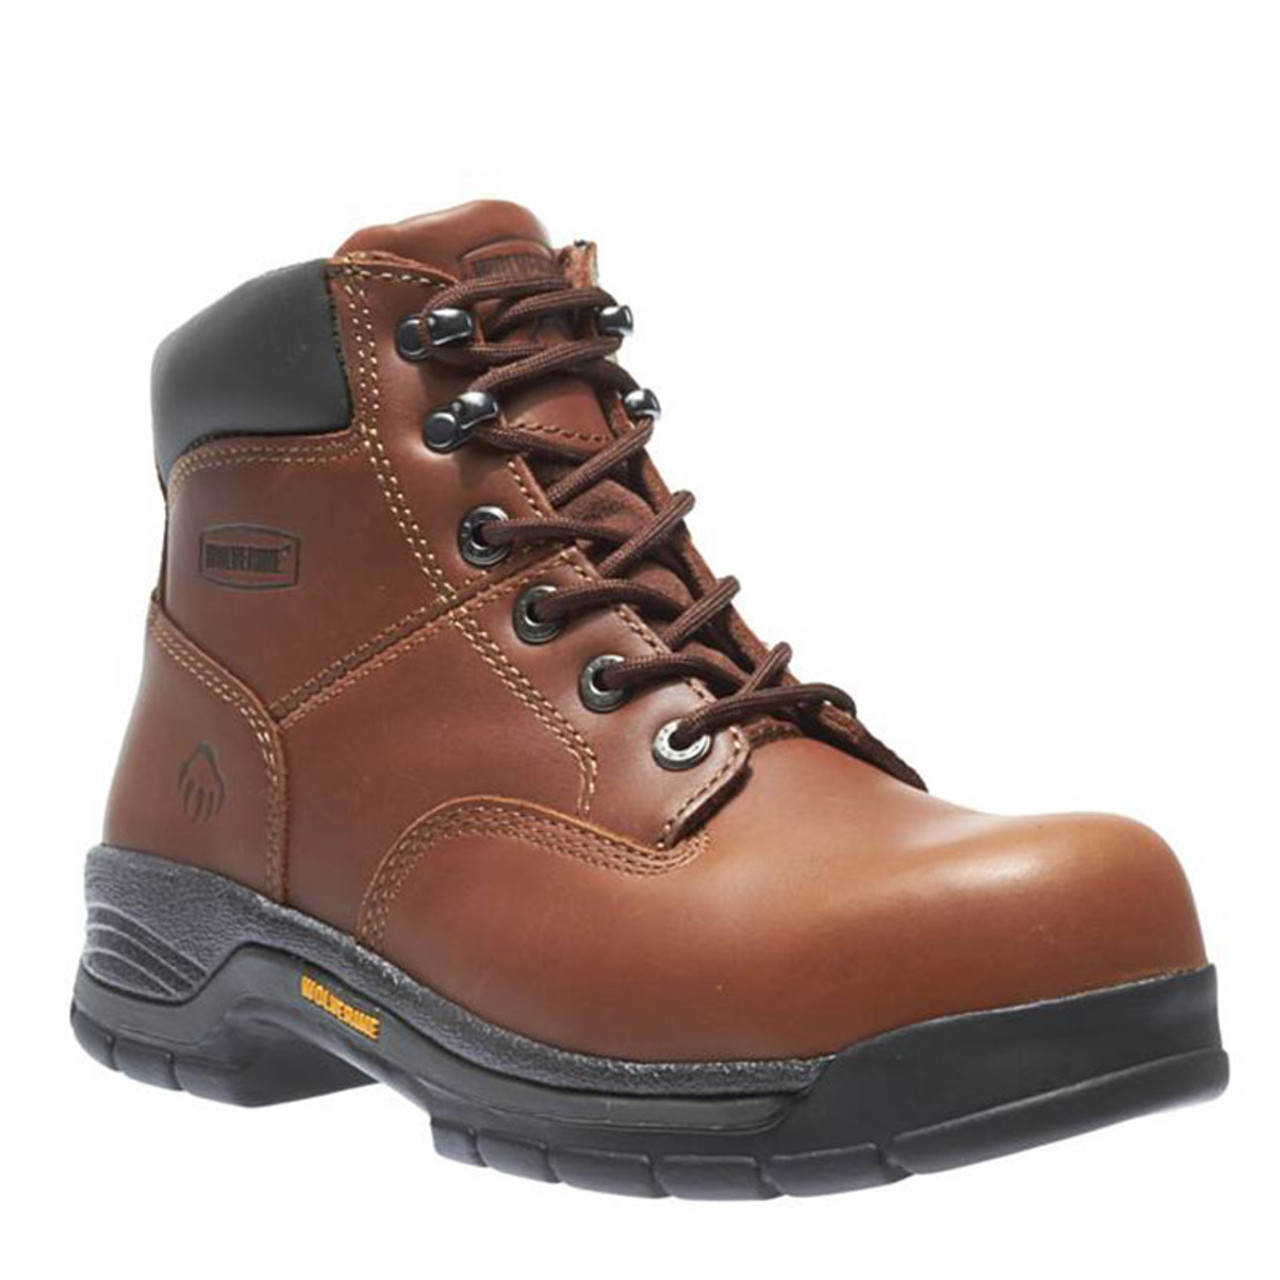 Wolverine W04904 HARRISON Steel Toe Non-Insulated Oiled Work Boots ...